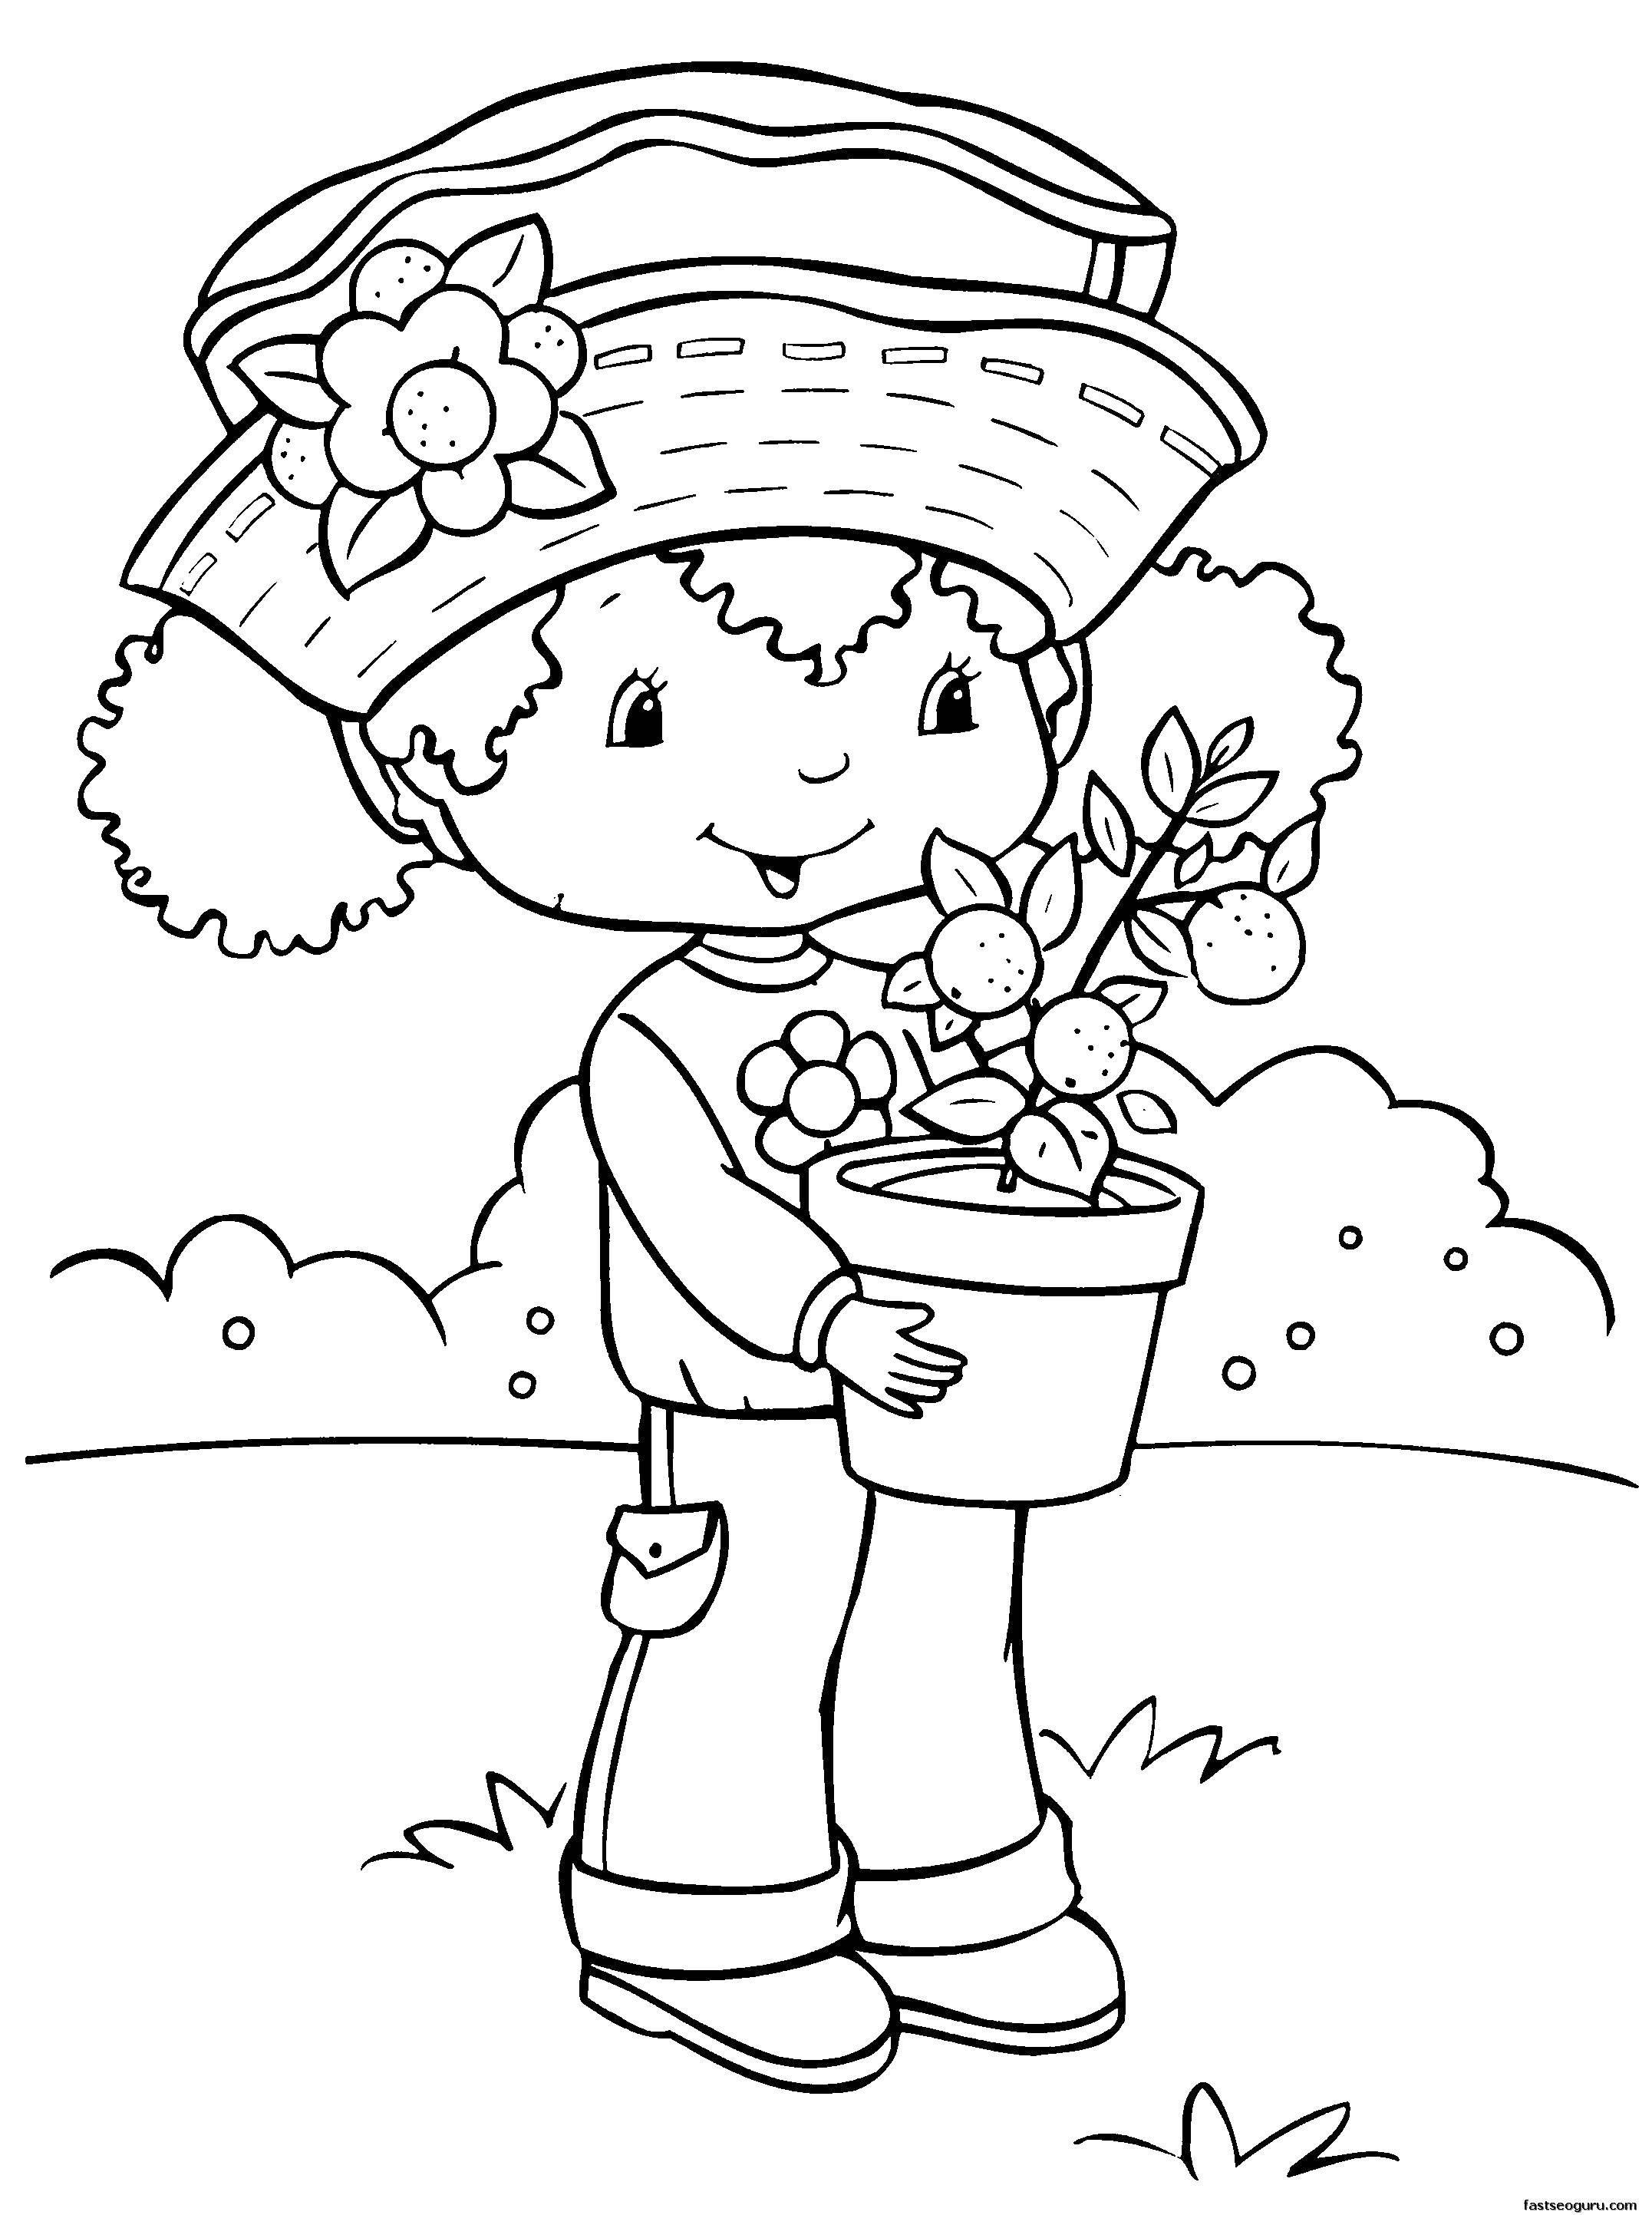 Coloring Girl with pot. Category For girls. Tags:  girl , child, flower.